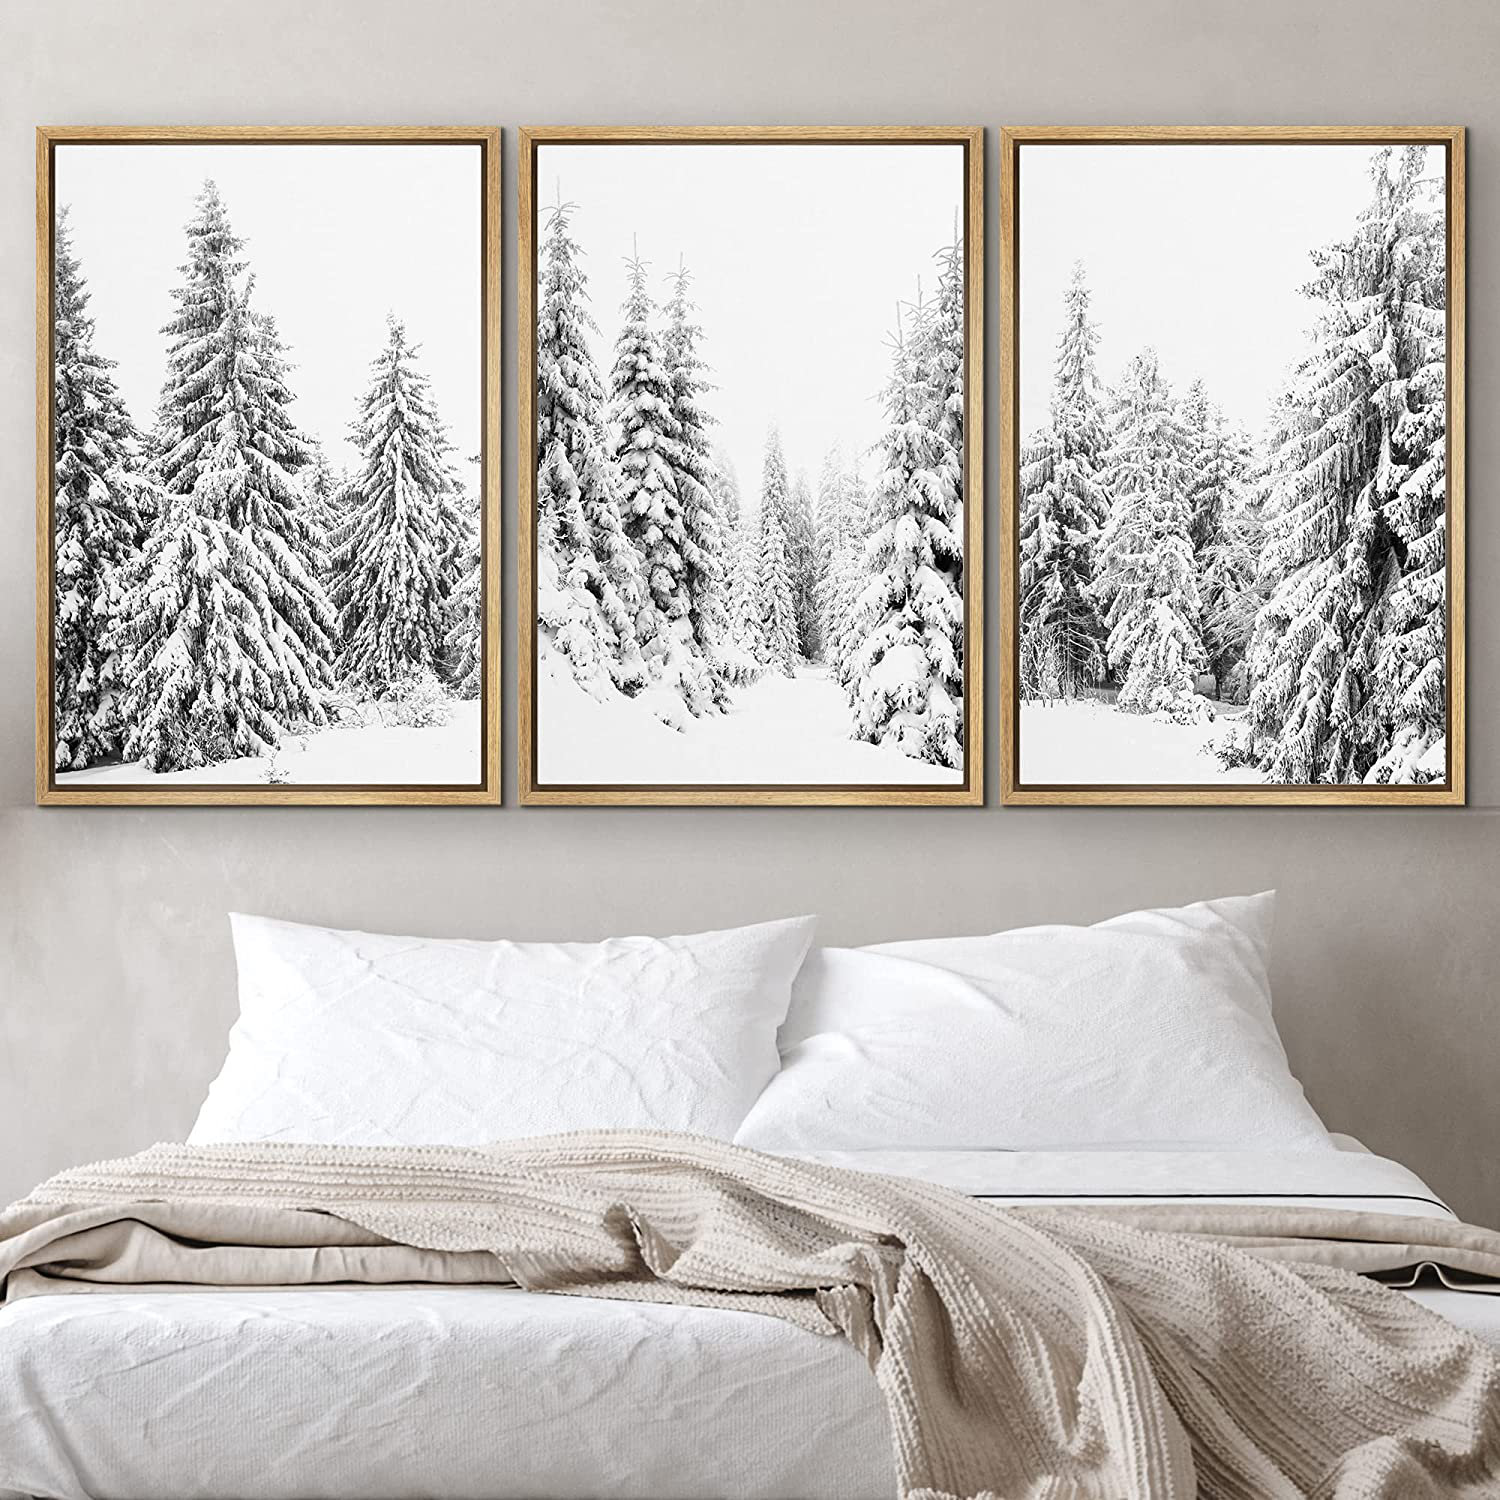 Settling In - Set of 3 - Art Prints or Canvases  Forest painting,  Stretched canvas prints, Canvas set